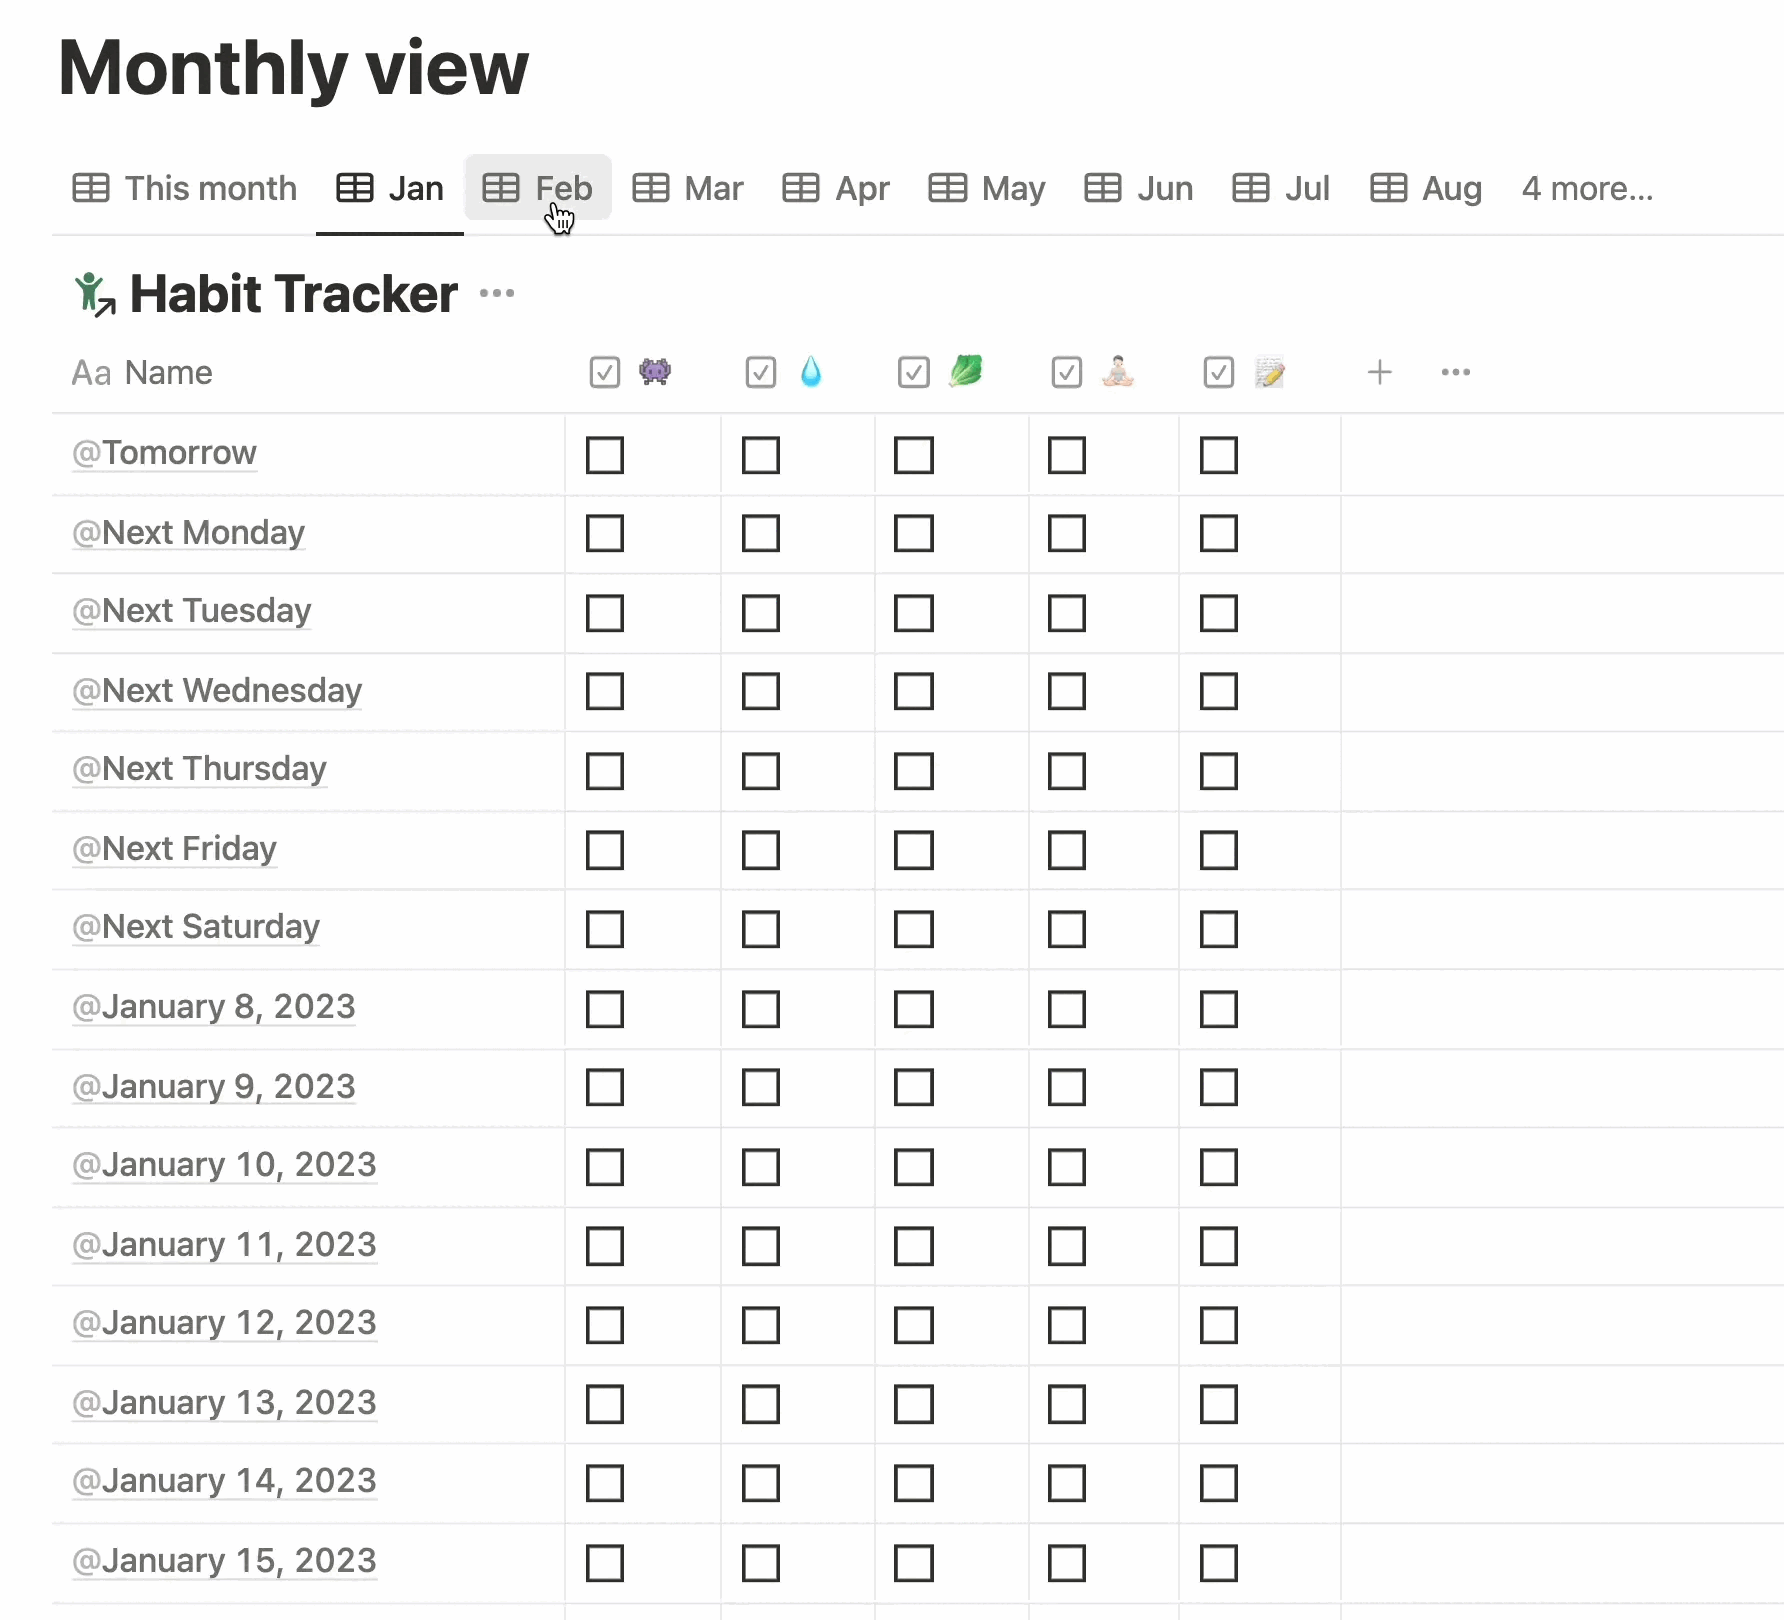 Daily habits checklist displayed in monthly format